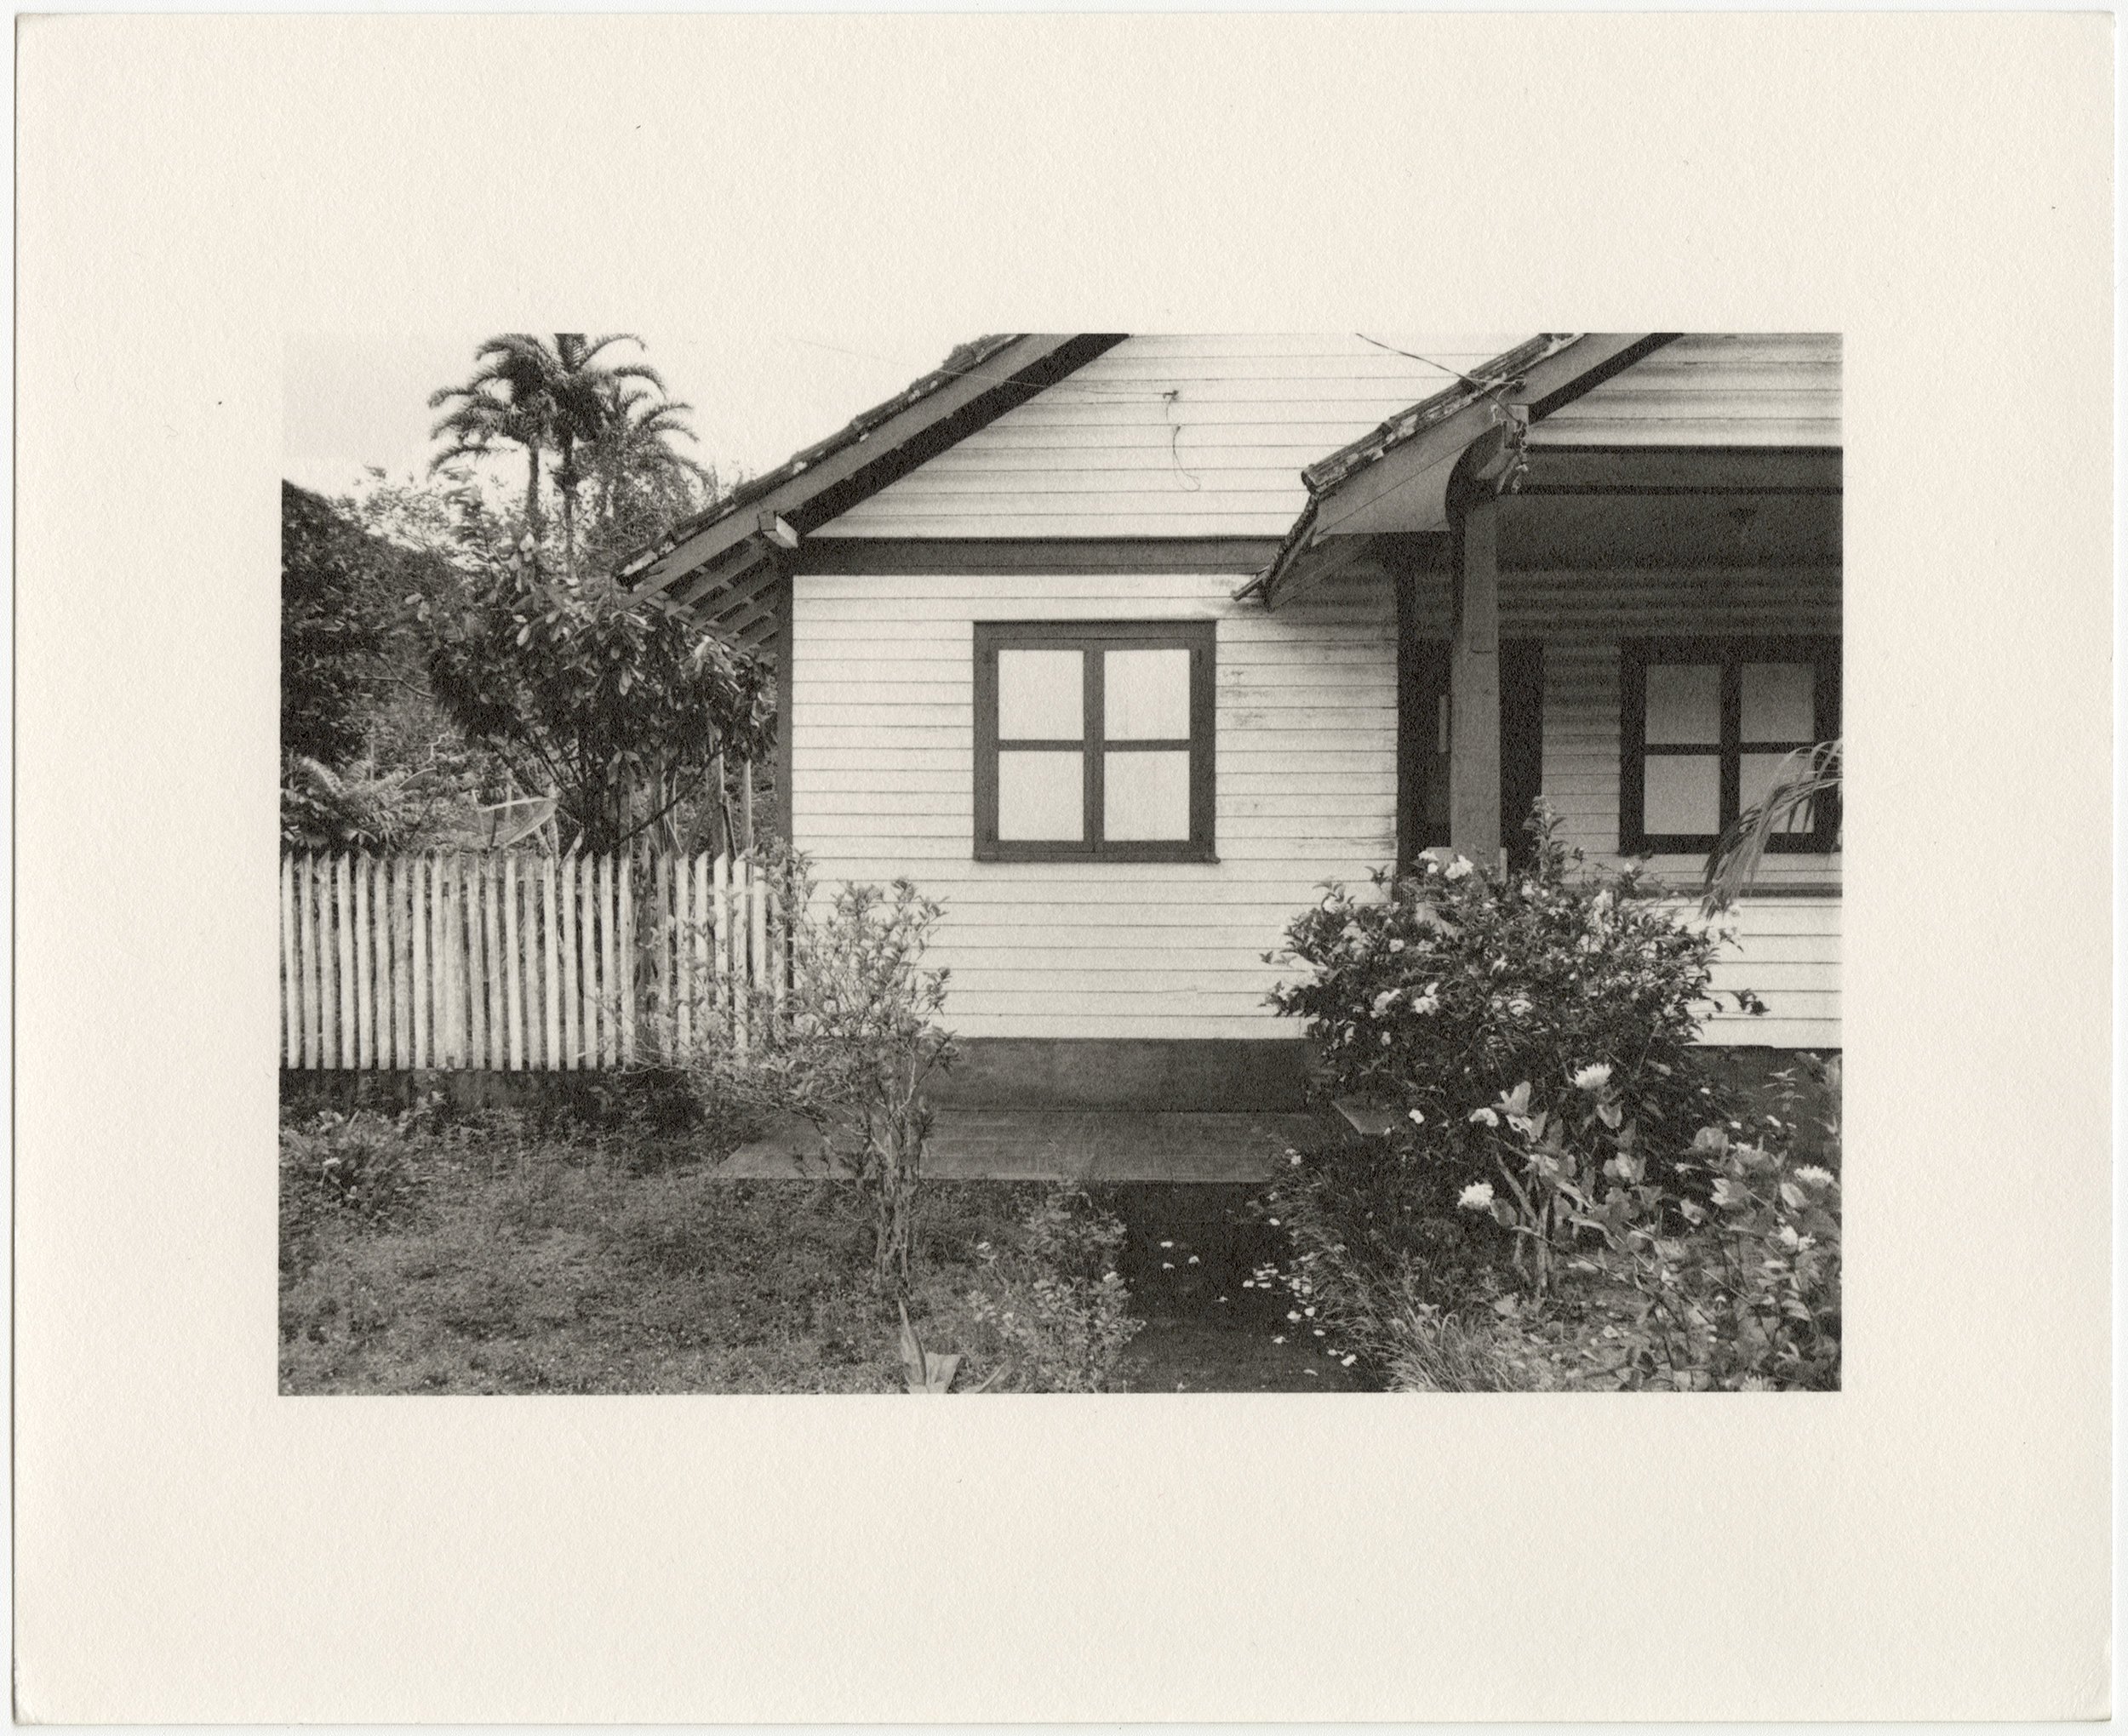  Belterra employee house with window and white picket fence, built in 1934 by the Companhia Ford Industrial Do Brasil Ford Motor Company. 2014 Belterra, Pará, Brazil. Gelatin silver fiber print, 8” x 10”, 2014/2018 